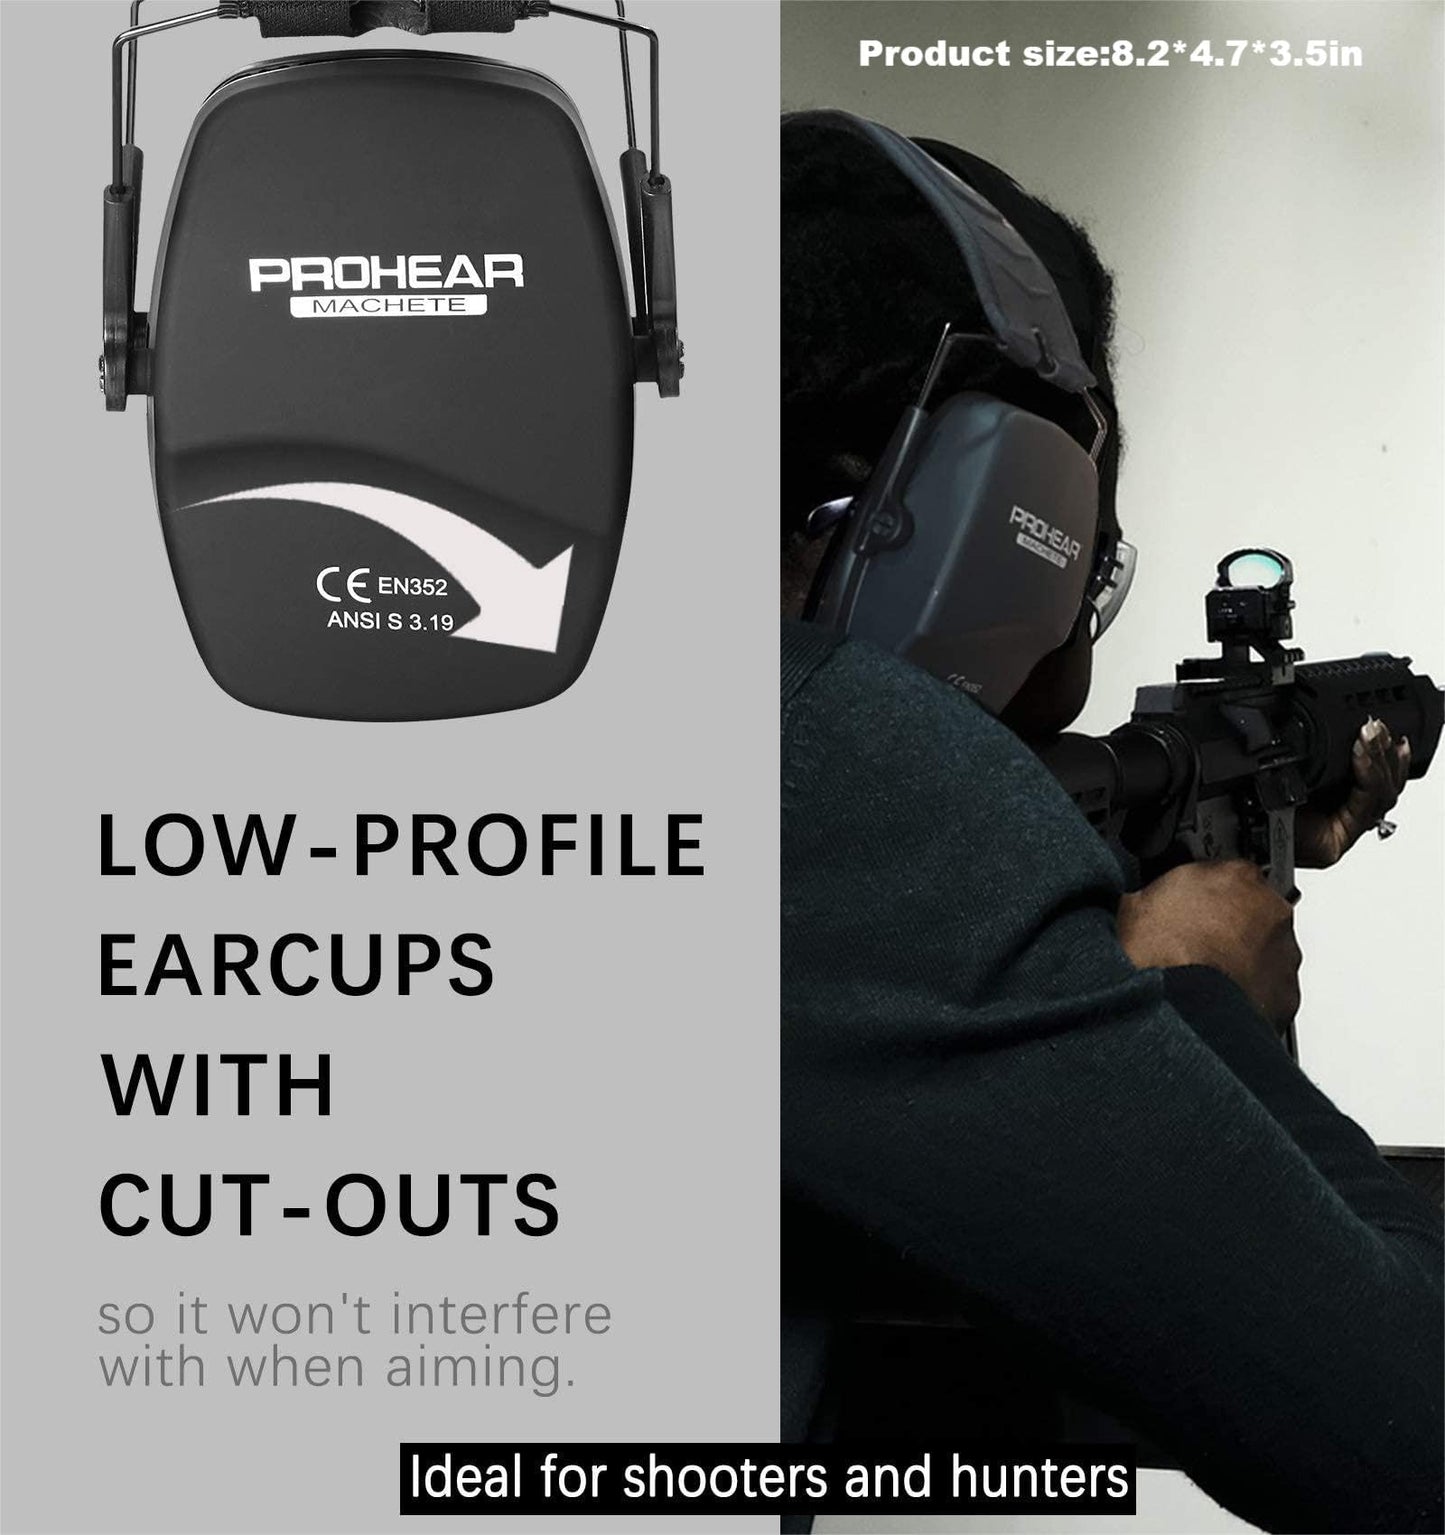 PROHEAR 016 Ear Protection Safety Earmuffs for Shooting, NRR 26dB Noise Reduction Slim Passive Hearing Protector with Low-Profile Earcups, Compact